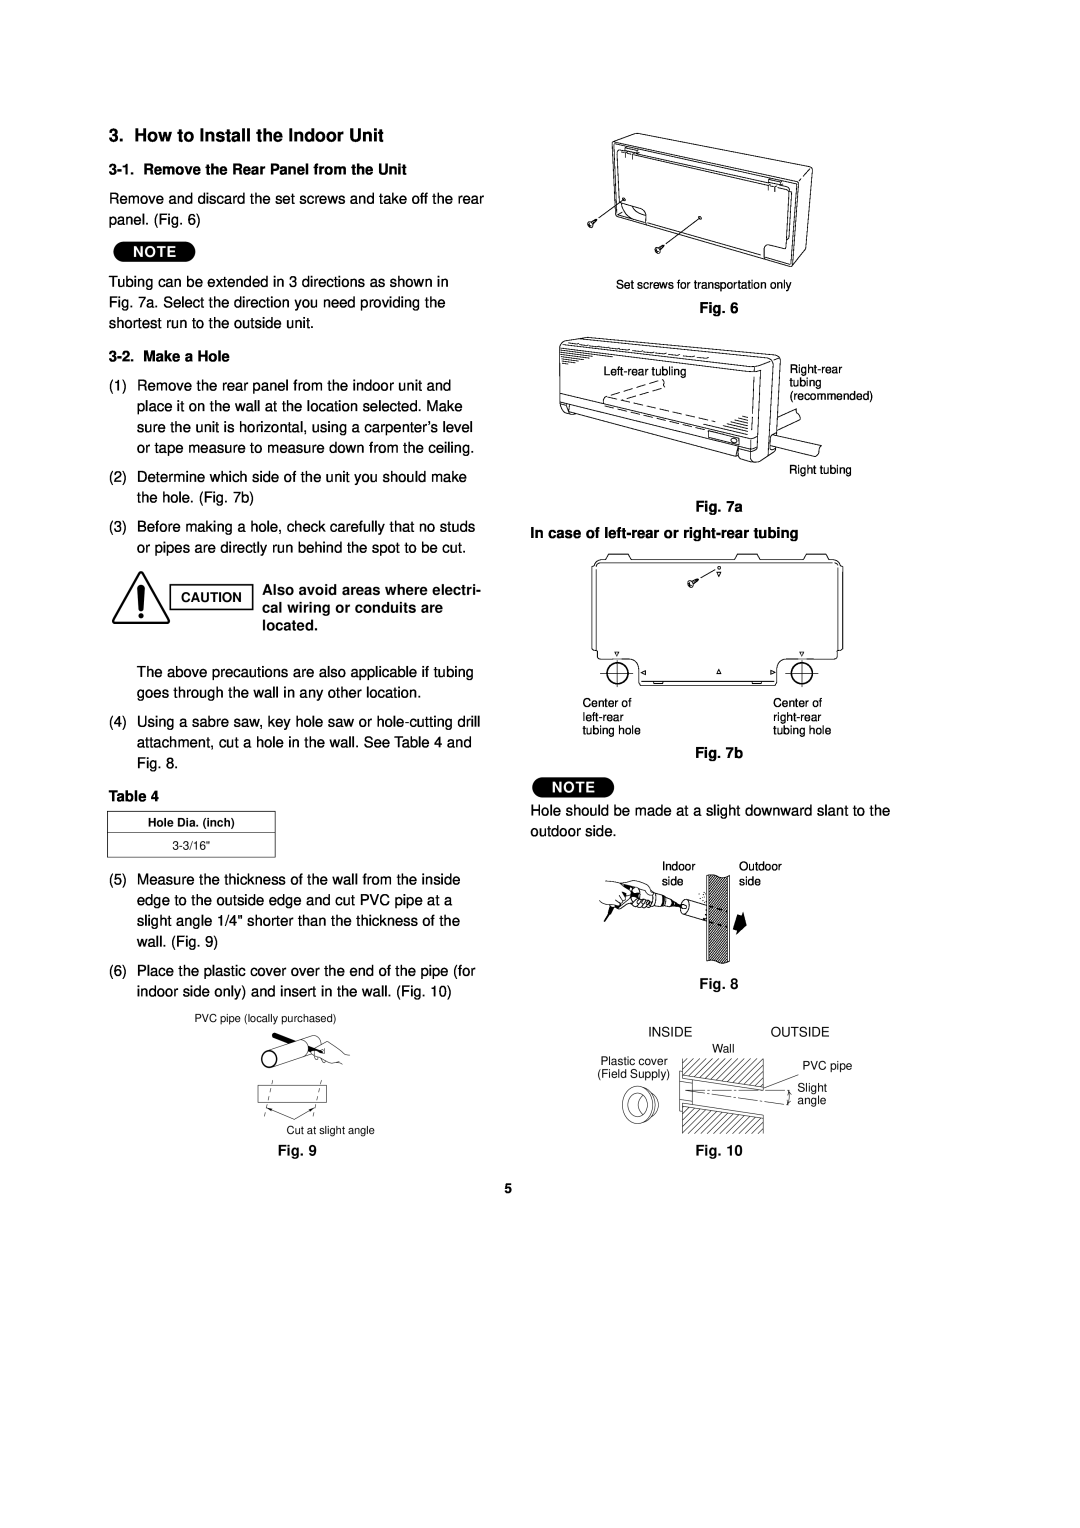 Sanyo C2432, CL2432 installation instructions How to Install the Indoor Unit 